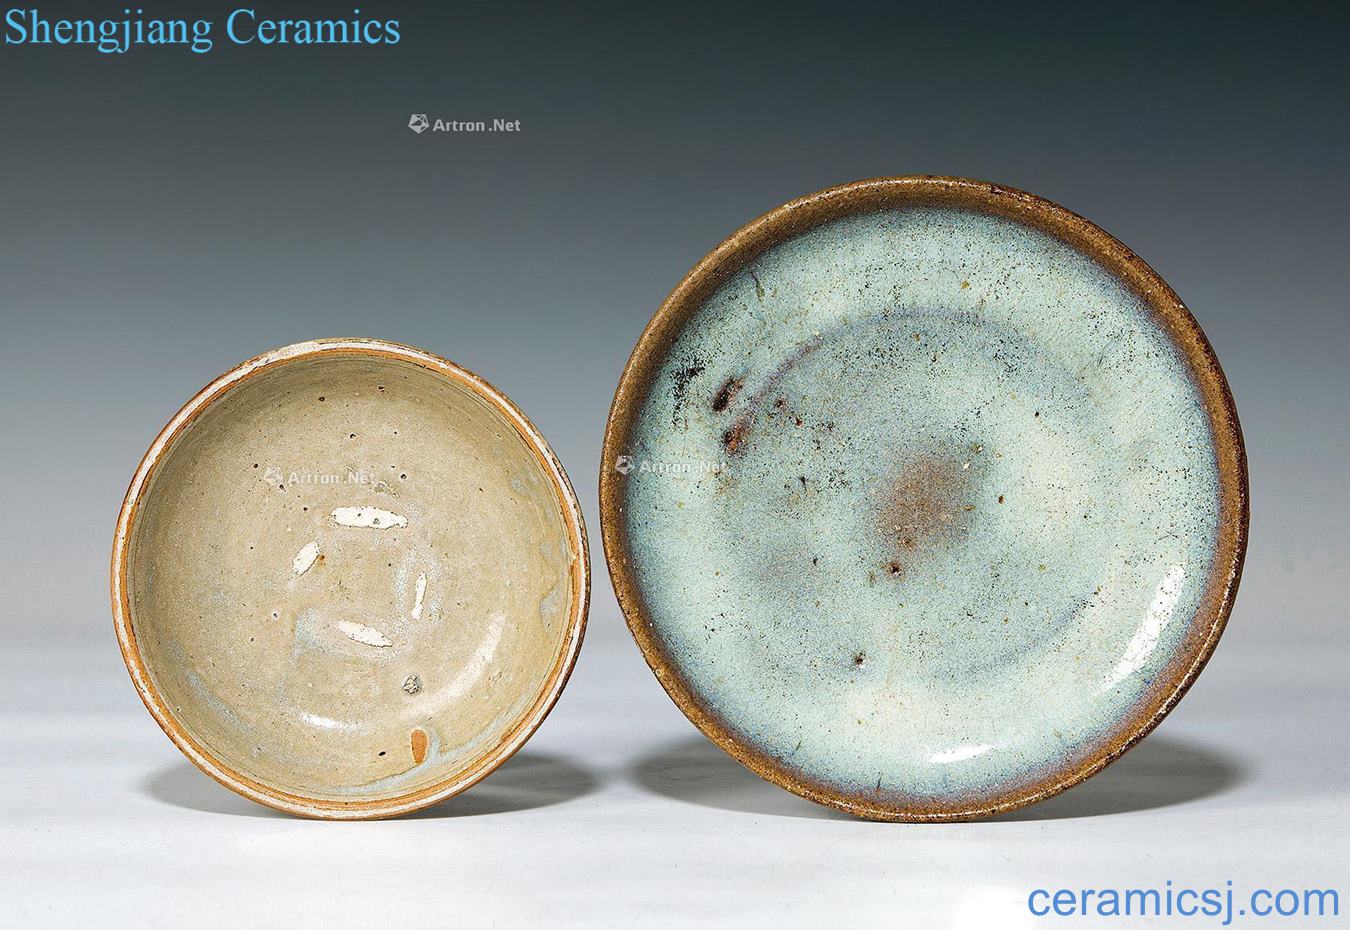 Yuan/Ming jun glaze plate and the sui dynasty Celadon small dish